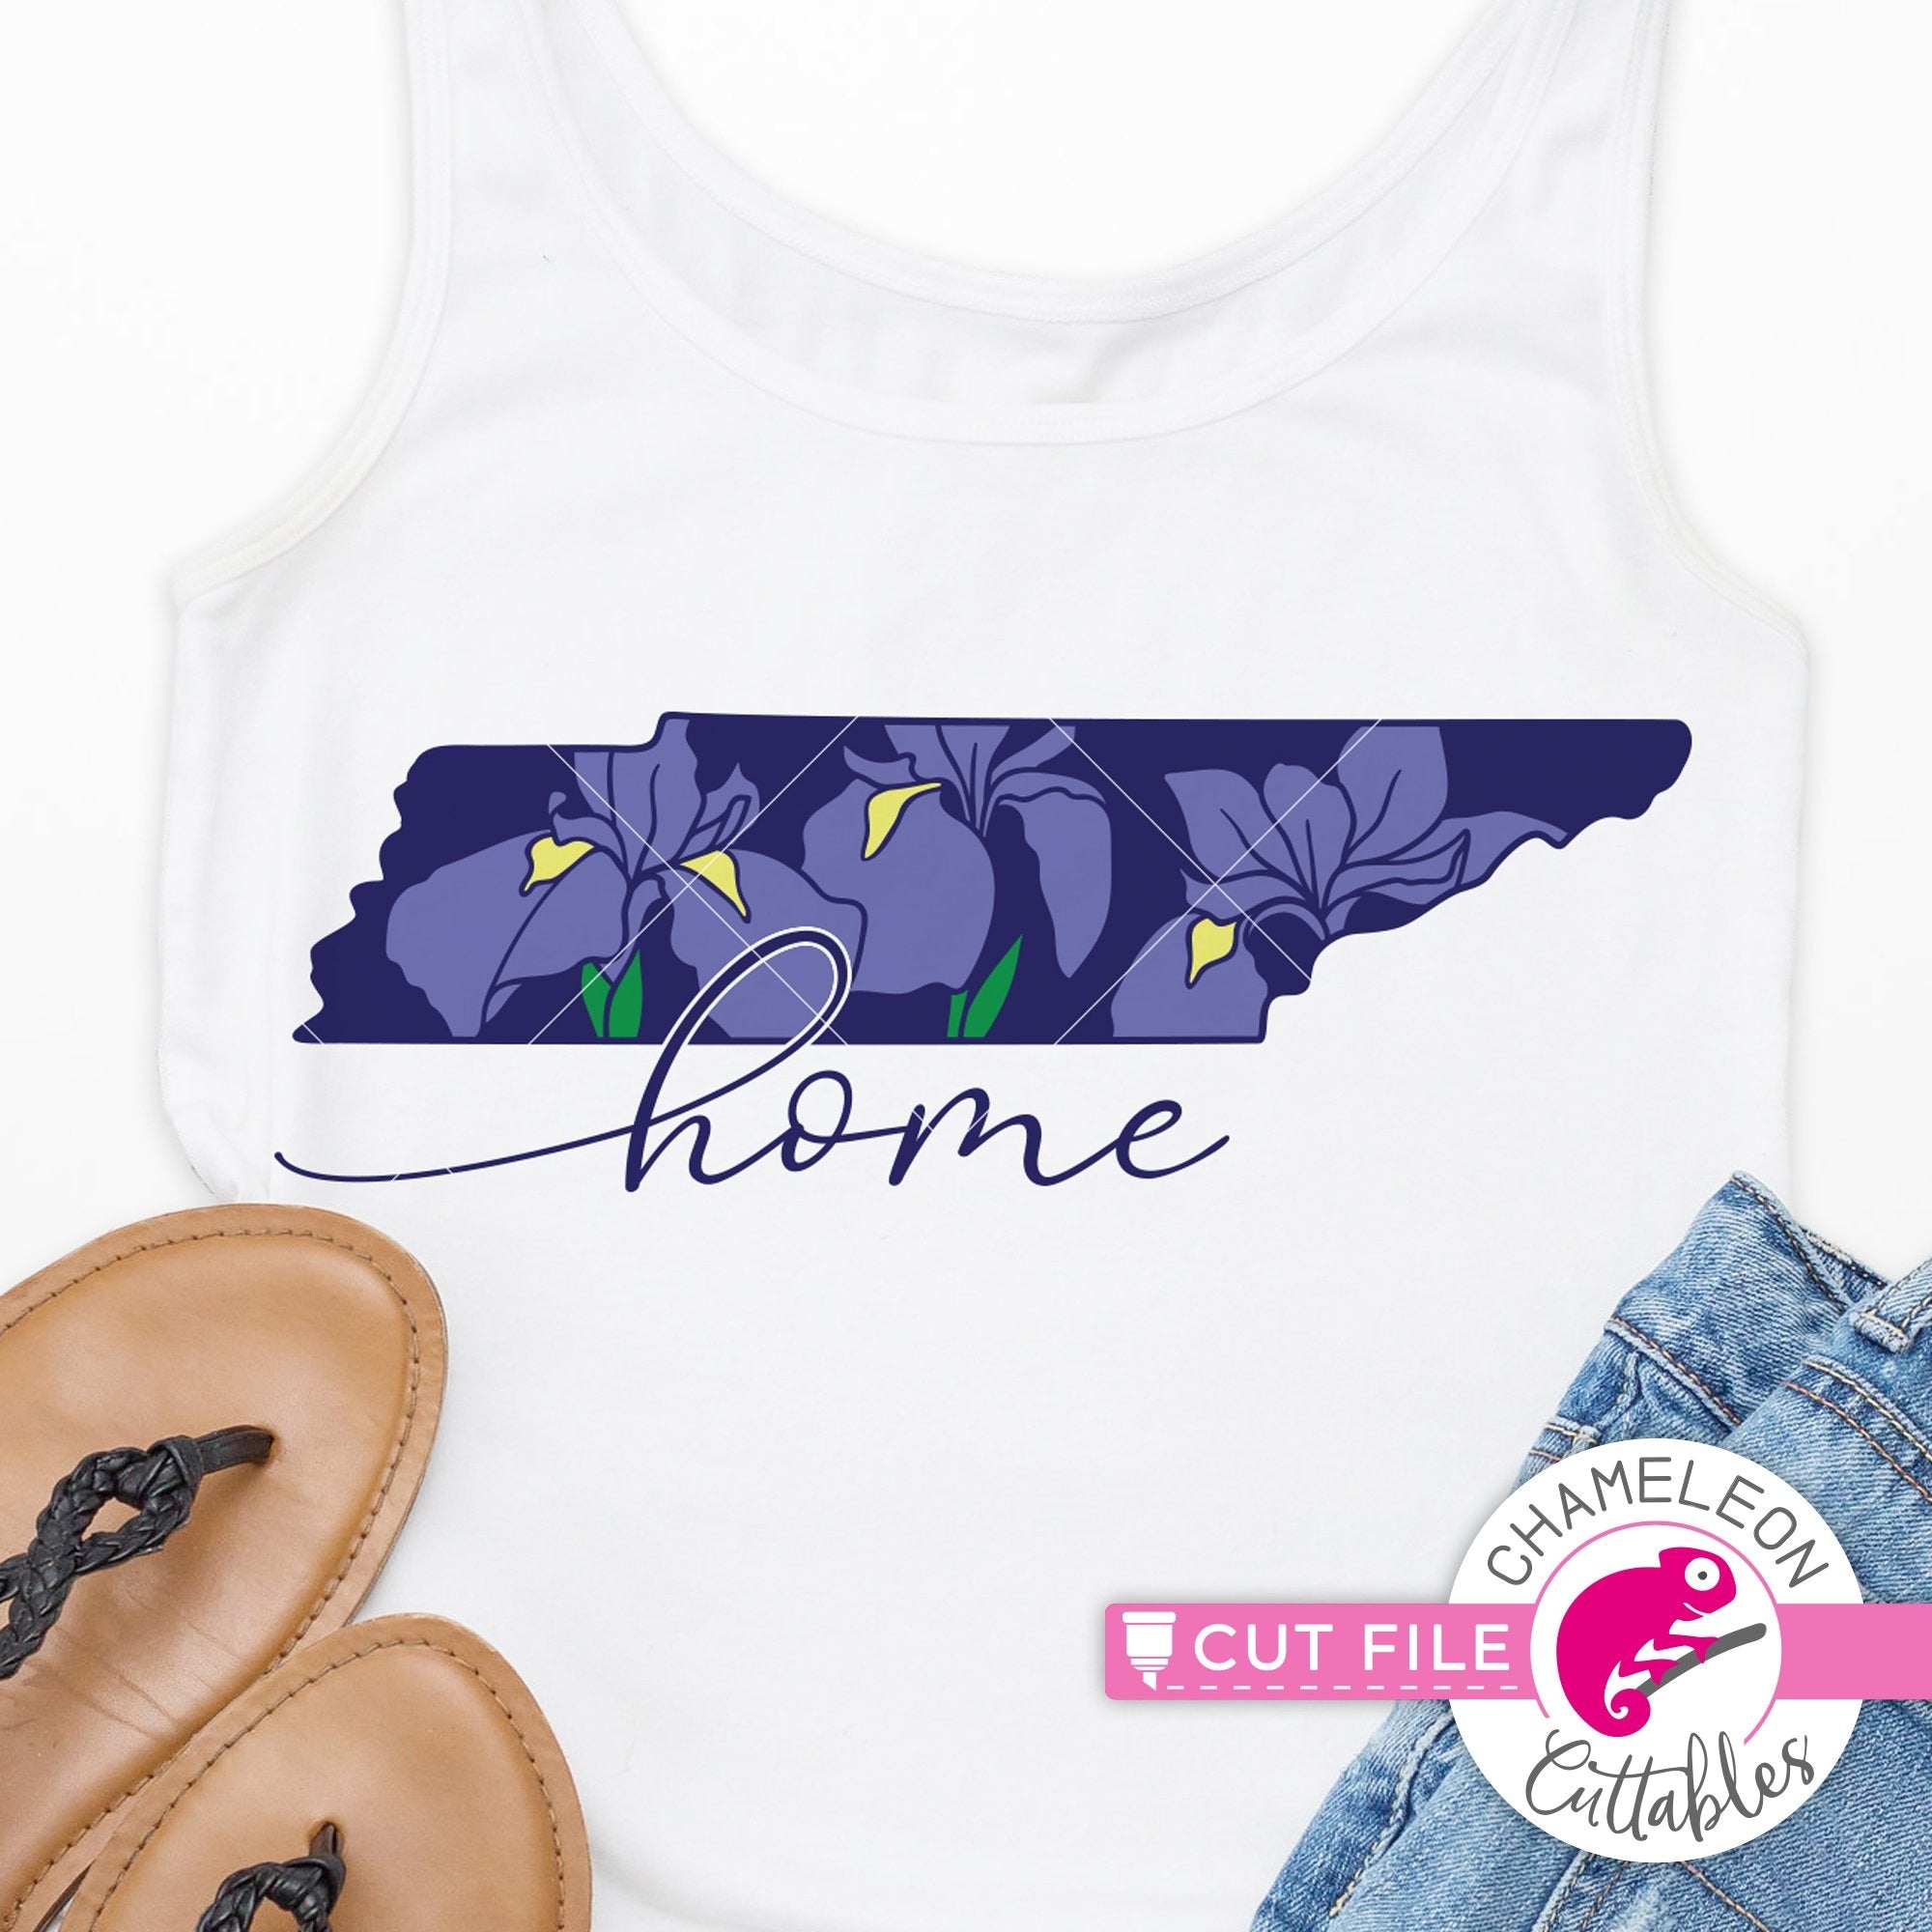 Download Home Tennessee State Flower Iris Layered Svg Png Dxf Eps Jpeg Chameleon Cuttables Llc Chameleon Cuttables Llc